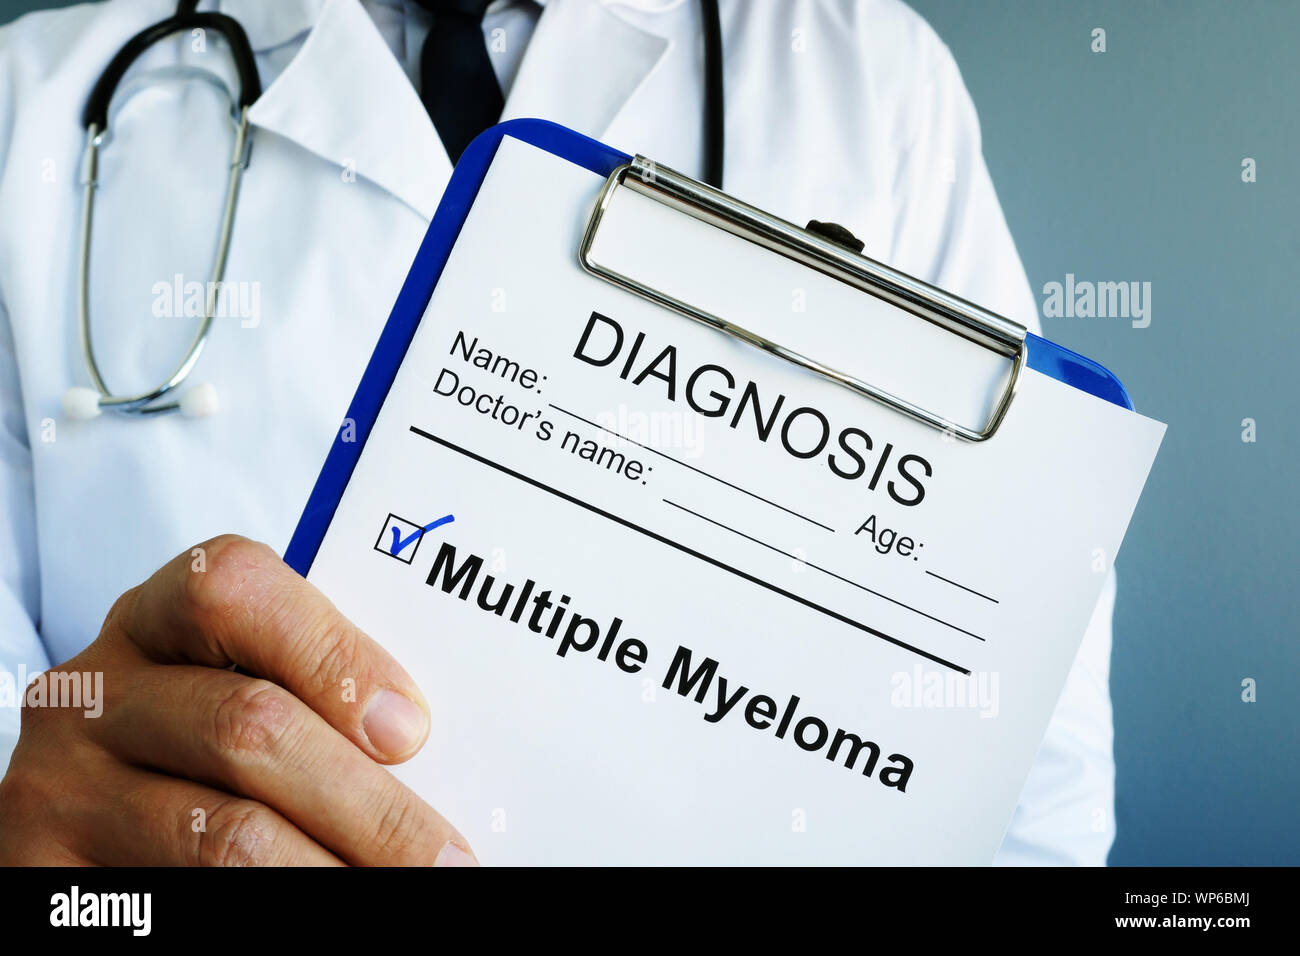 3,476 Myeloma Images, Stock Photos, 3D objects, & Vectors